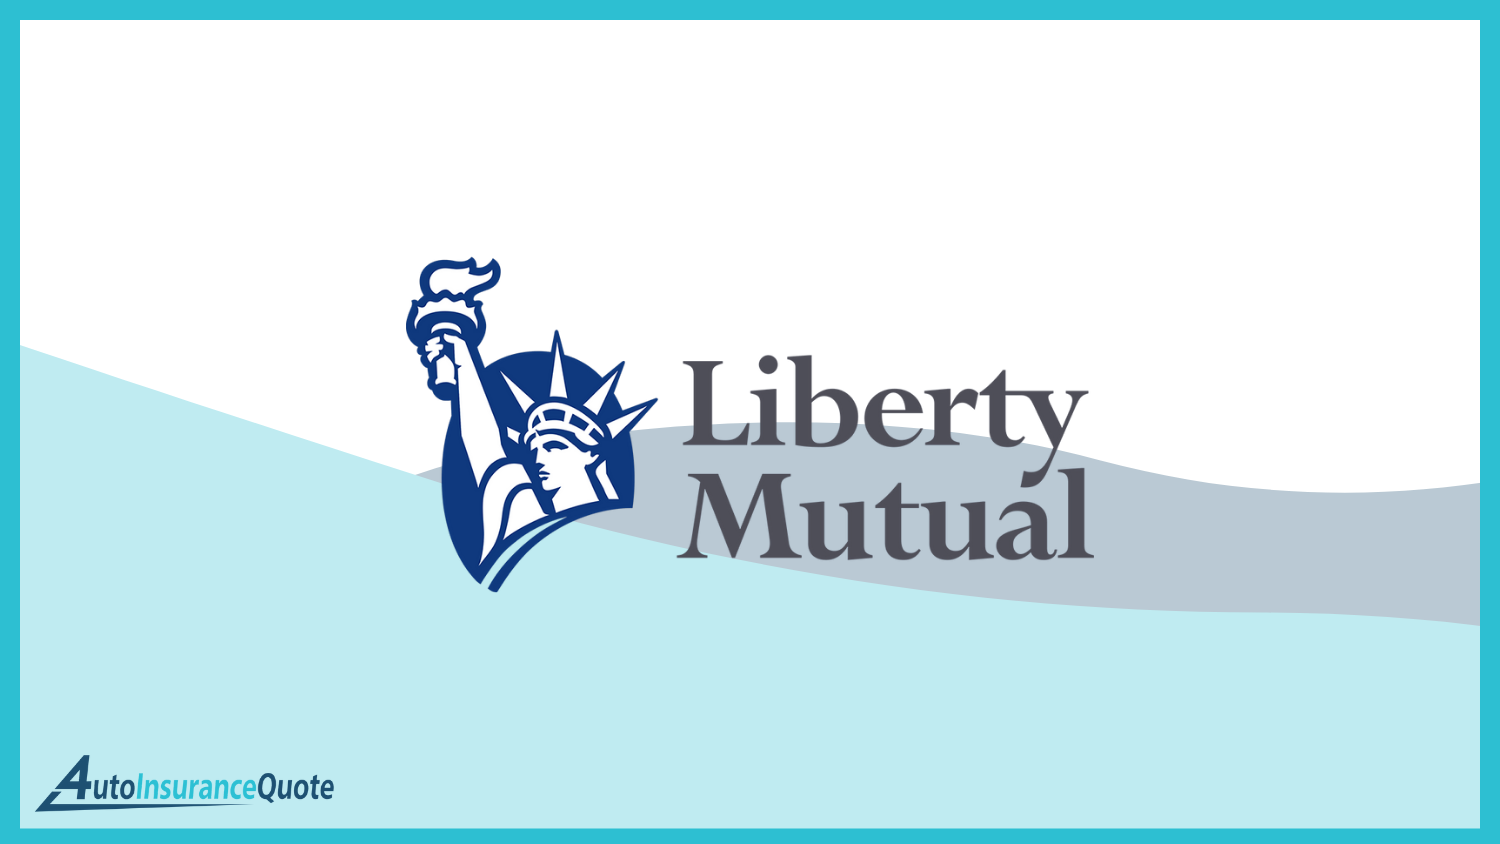 Liberty Mutual: Best Auto Insurance for Government Employees